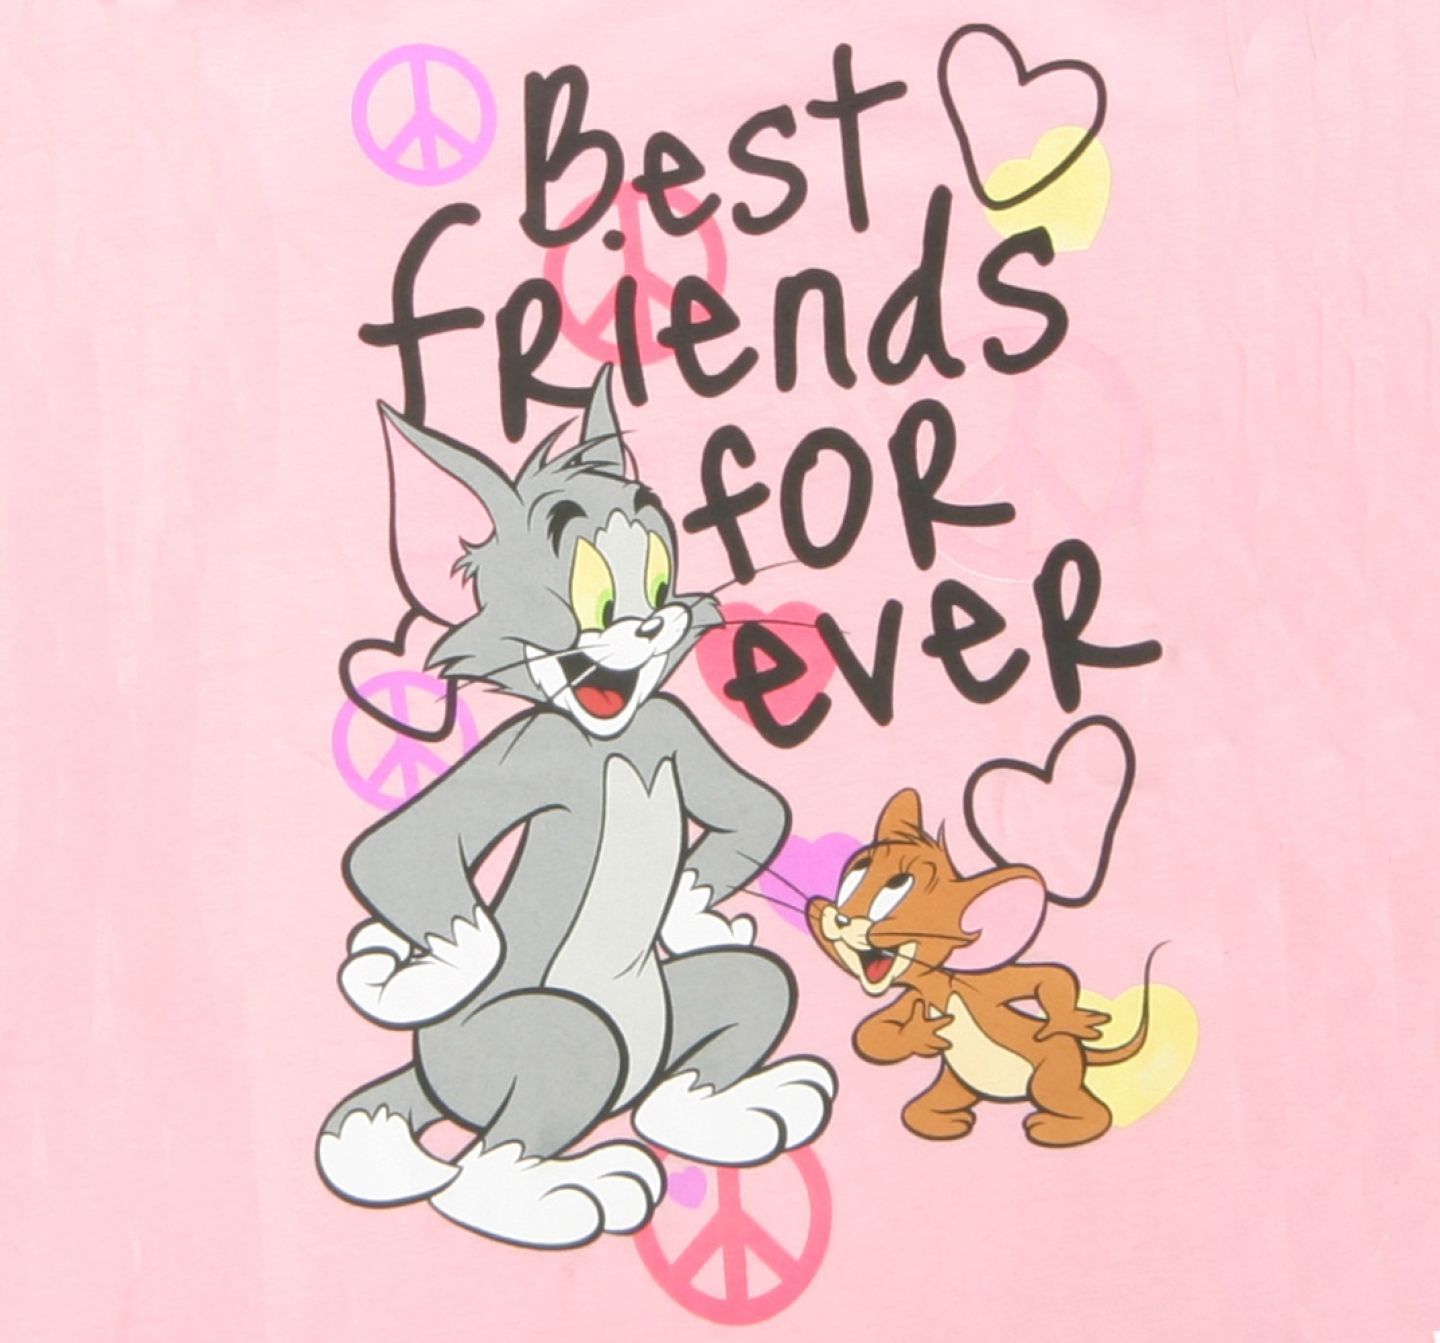 Tom And Jerry Friends Forever Wallpaper High Definition. Happy friendship day image, Friendship day image, Tom and jerry wallpaper